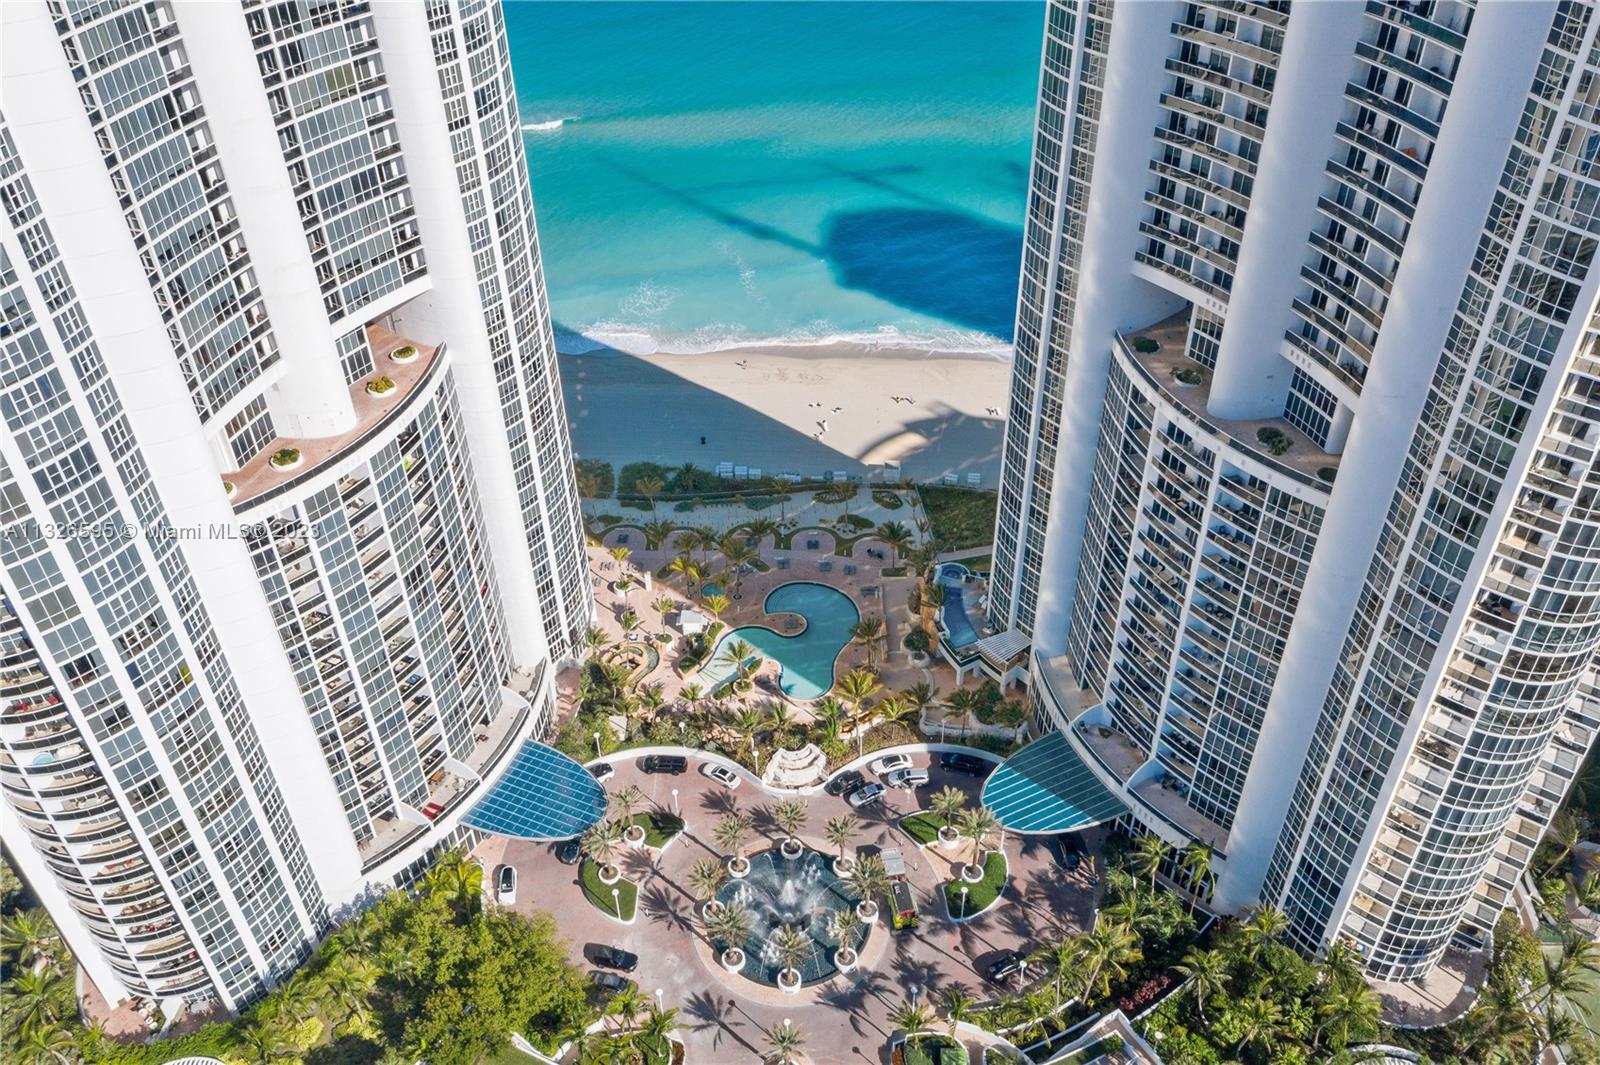 2 BEDROOM & 2 FULL BATH LUXURIOUS RESIDENCE AT TRUMP PALACE IN SUNNY ISLES BEACH, WITH SPECTACULAR O